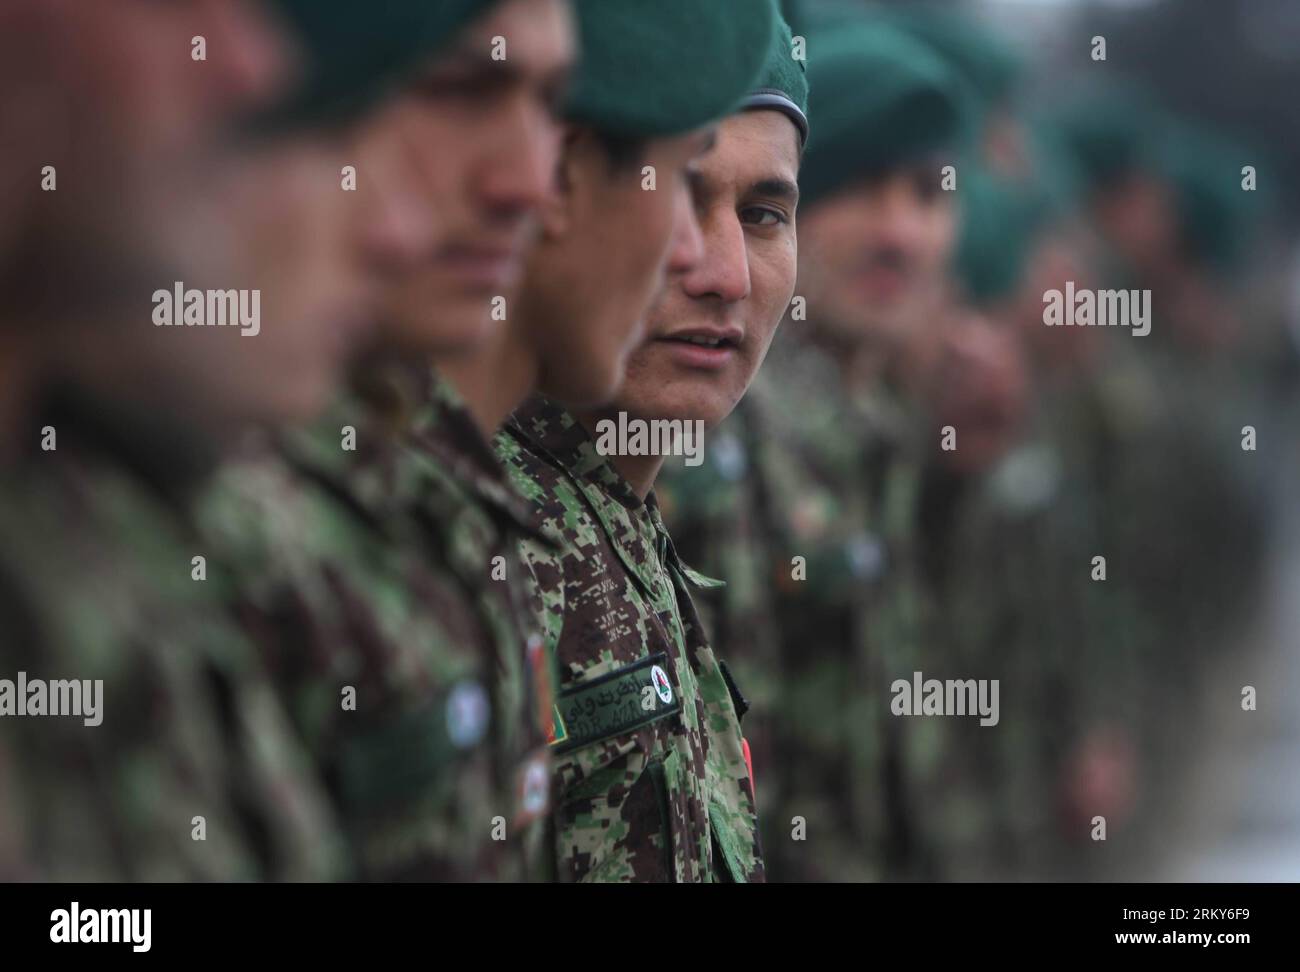 Bildnummer: 59155817  Datum: 31.01.2013  Copyright: imago/Xinhua (130131) -- KABUL, Jan. 31, 2013 (Xinhua) -- Newly graduated soldiers attend their graduation ceremony at the Kabul Military Training Center in Kabul, Afghanistan, on Jan. 31, 2013. A total of 1,400 soldiers graduated from Kabul Military Training Center (KMTC) on Thursday and were commissioned to Afghan National Army (ANA), General Aminullah Patyannai commander of KMTC said. (Xinhua/Ahmad Massoud) AFGHANISTAN-KABUL-SOLDIERS-GRADUATION PUBLICATIONxNOTxINxCHN Gesellschaft Militär Armee Soldat Ausbildung Militärausbildung Abschluss Stock Photo